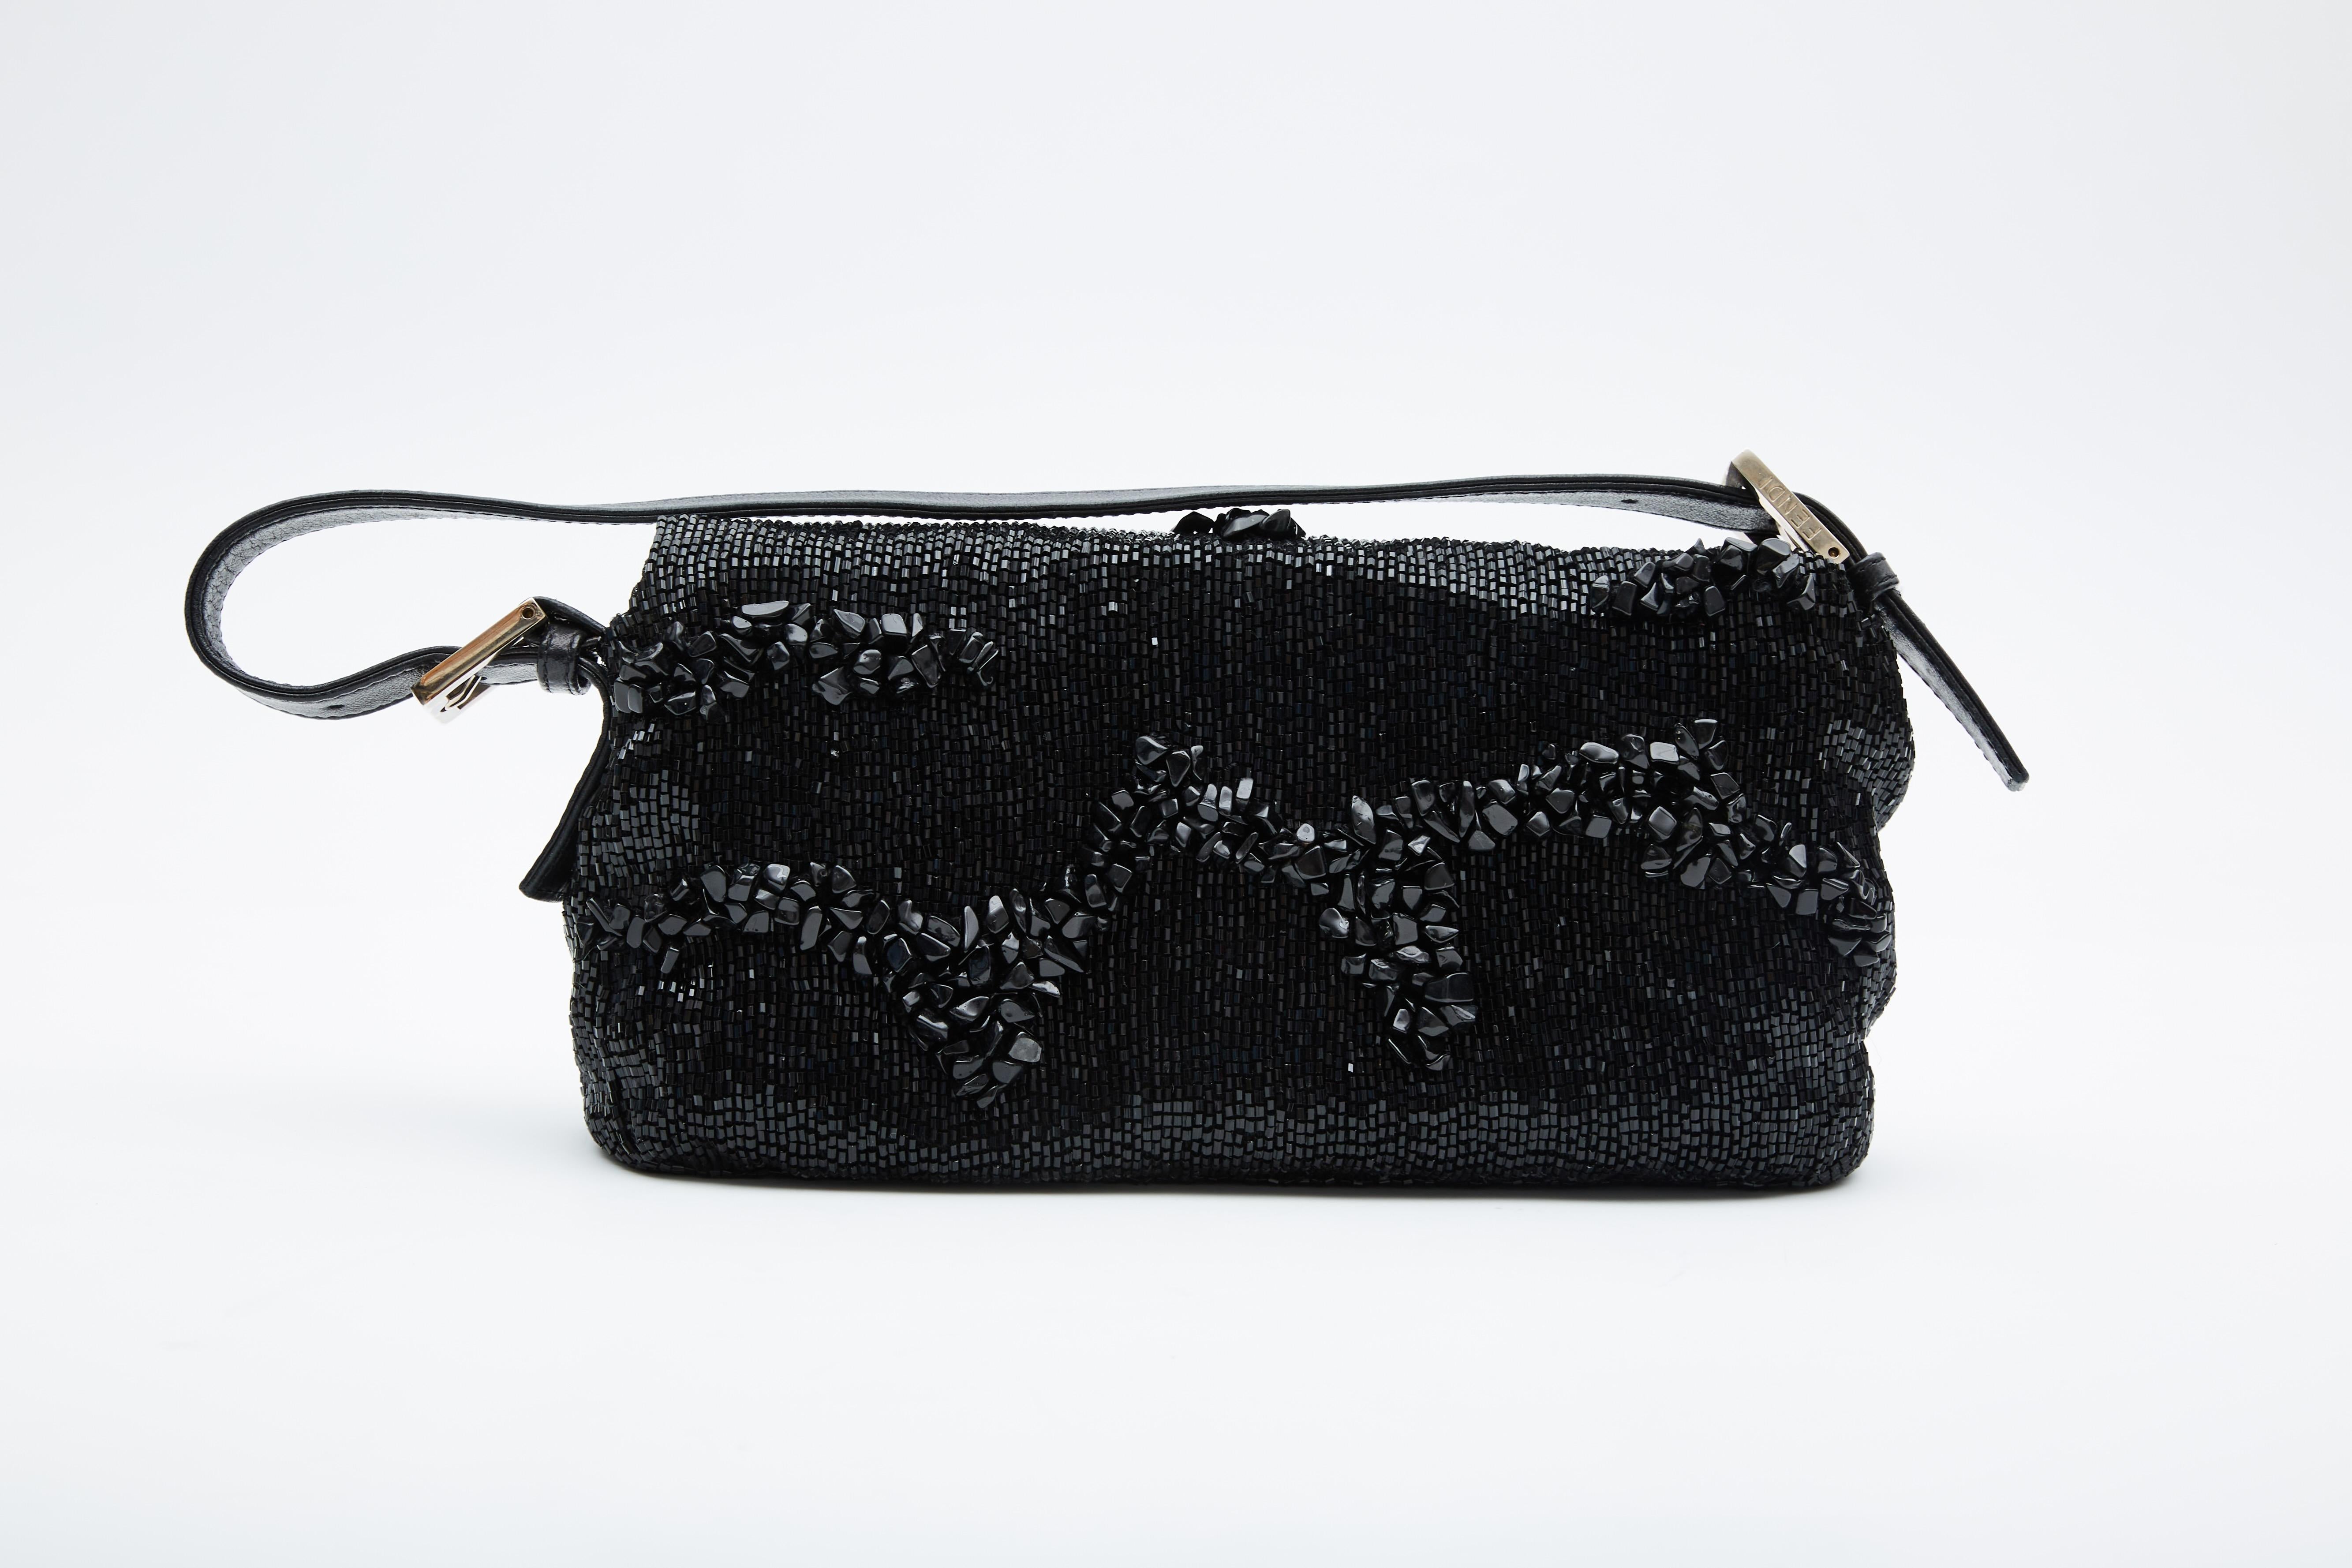 COLOR: Black
MATERIAL: Beads
ITEM CODE: Code rubbed off
MEASURES: H 6.5” x L 11” x D 2.5”
DROP: 7.5”
COMES WITH: Dust bag
CONDITION: Good - discoloration to interior with make up stains and and pen stains. Bag was refurbished professionally.

Made